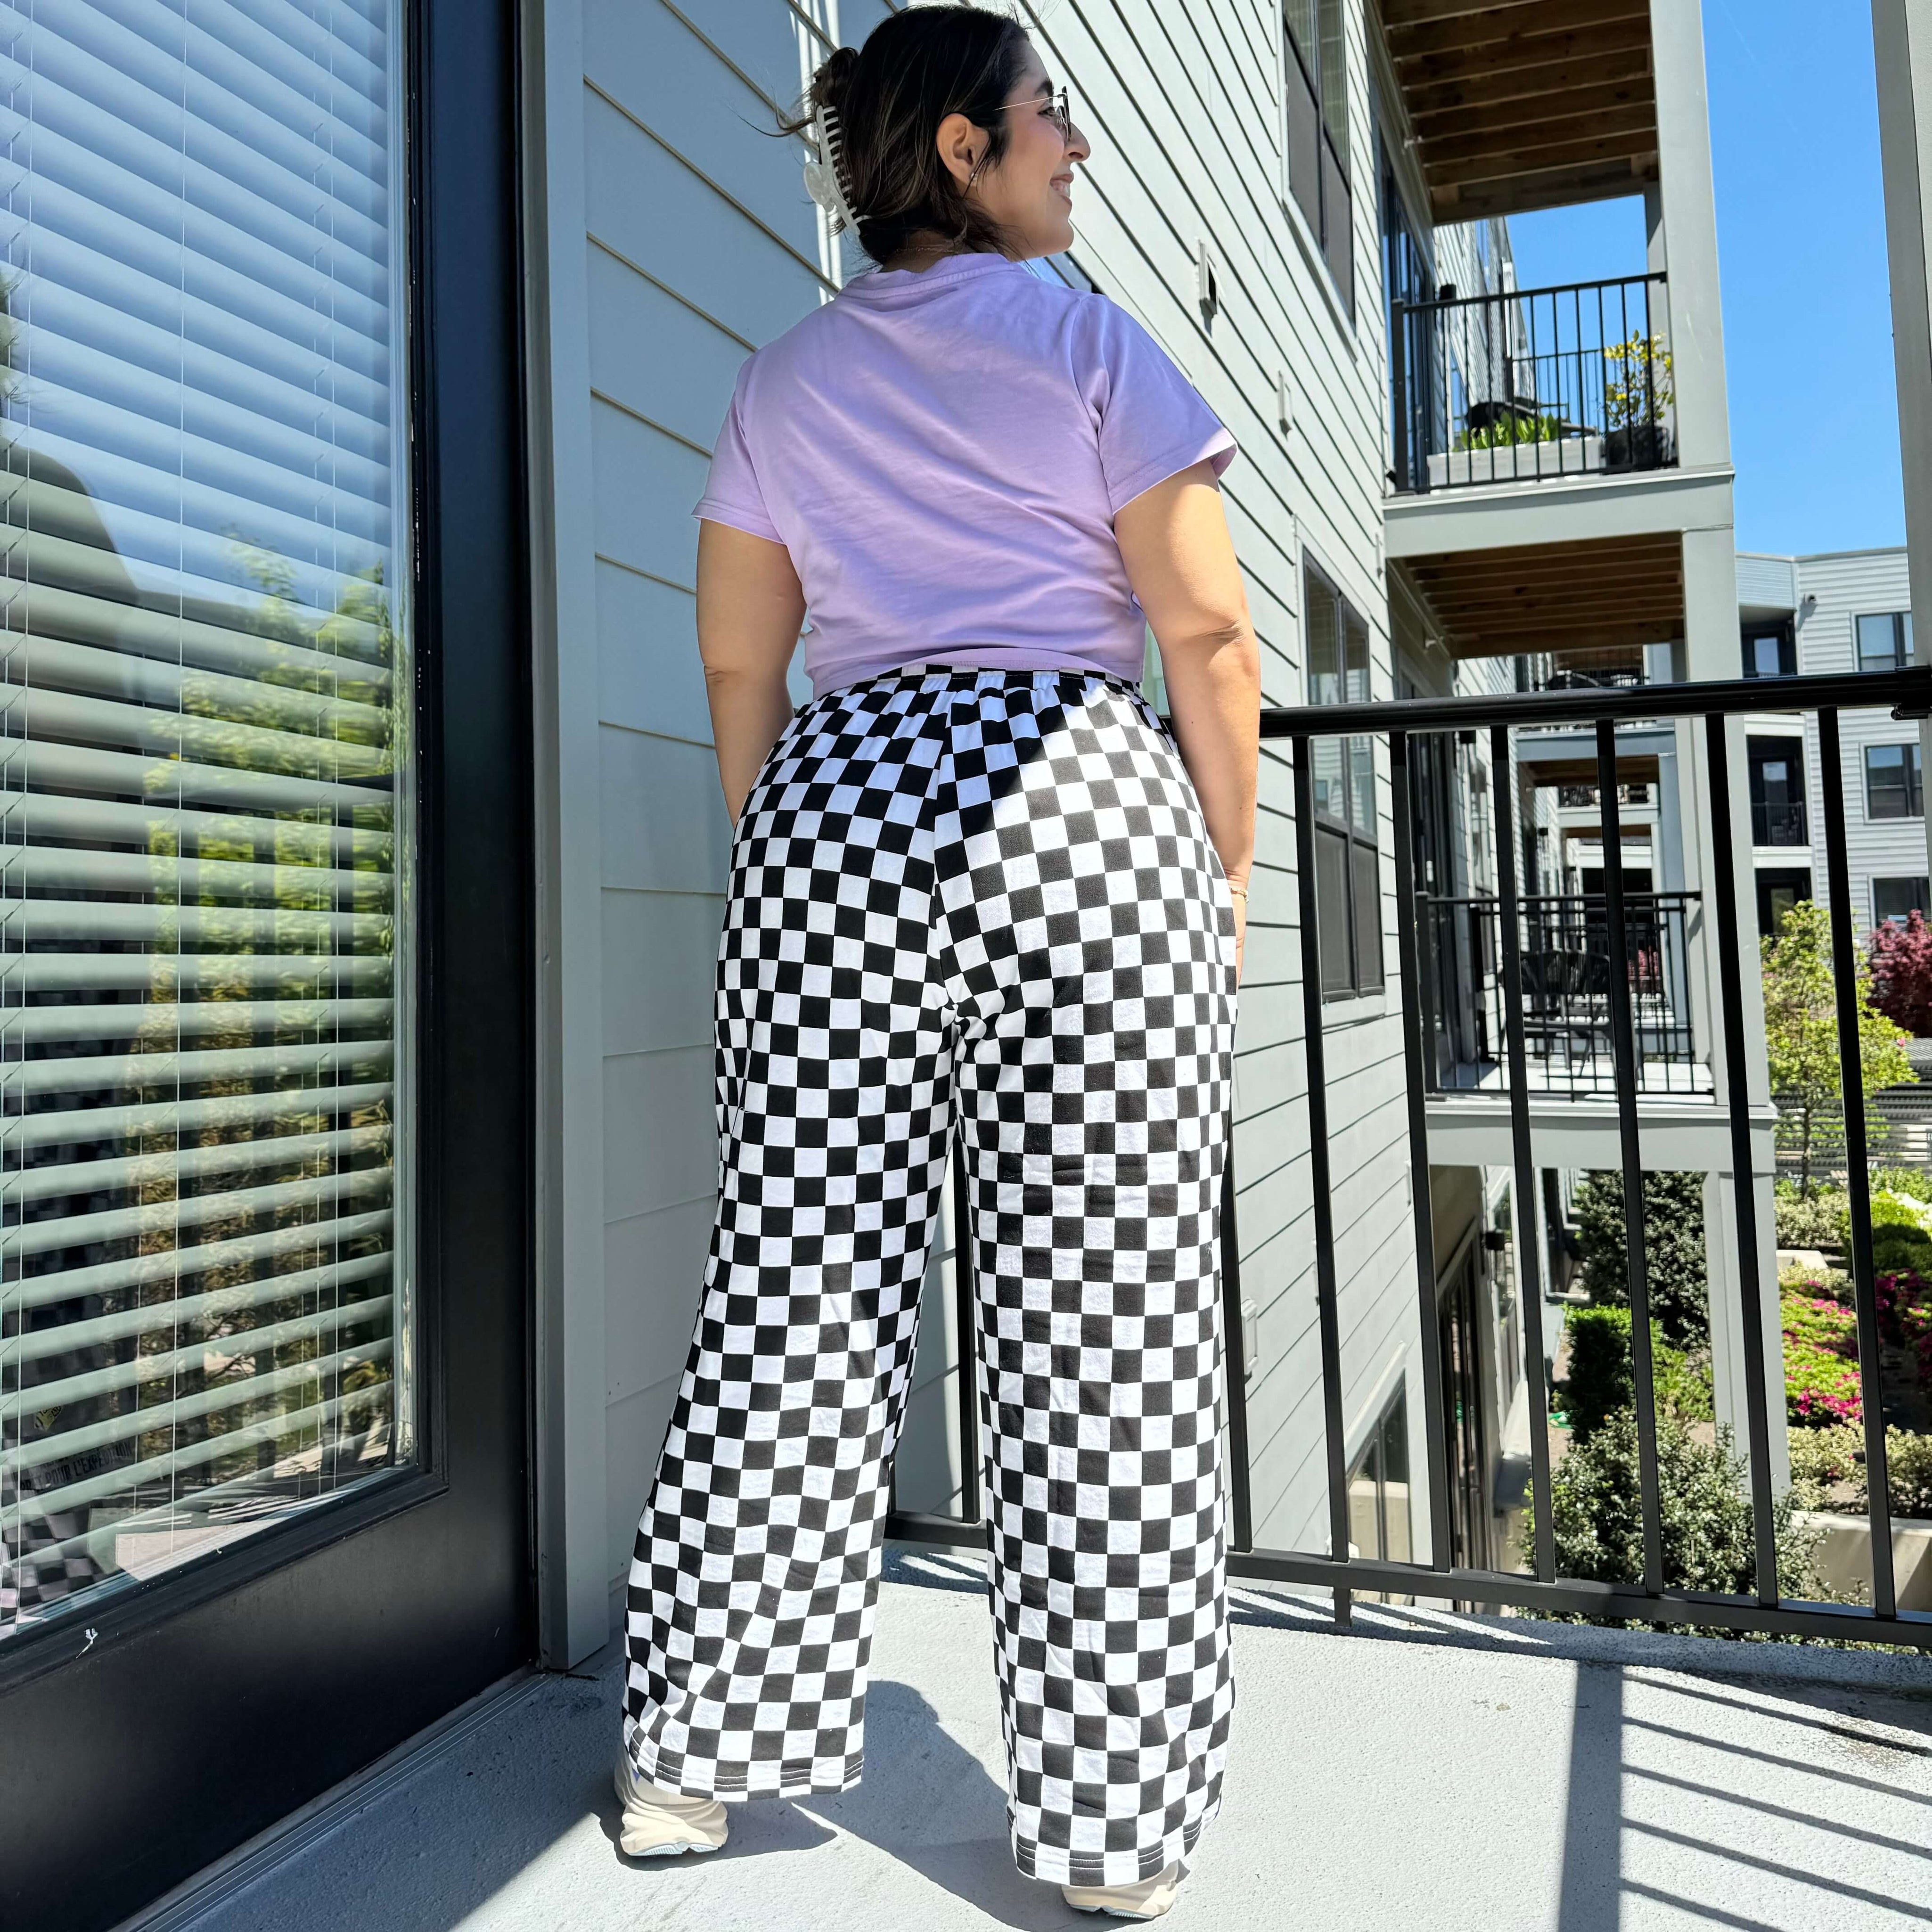 29" Inseam Be Yourself Pants - Black Checker *PREORDER*